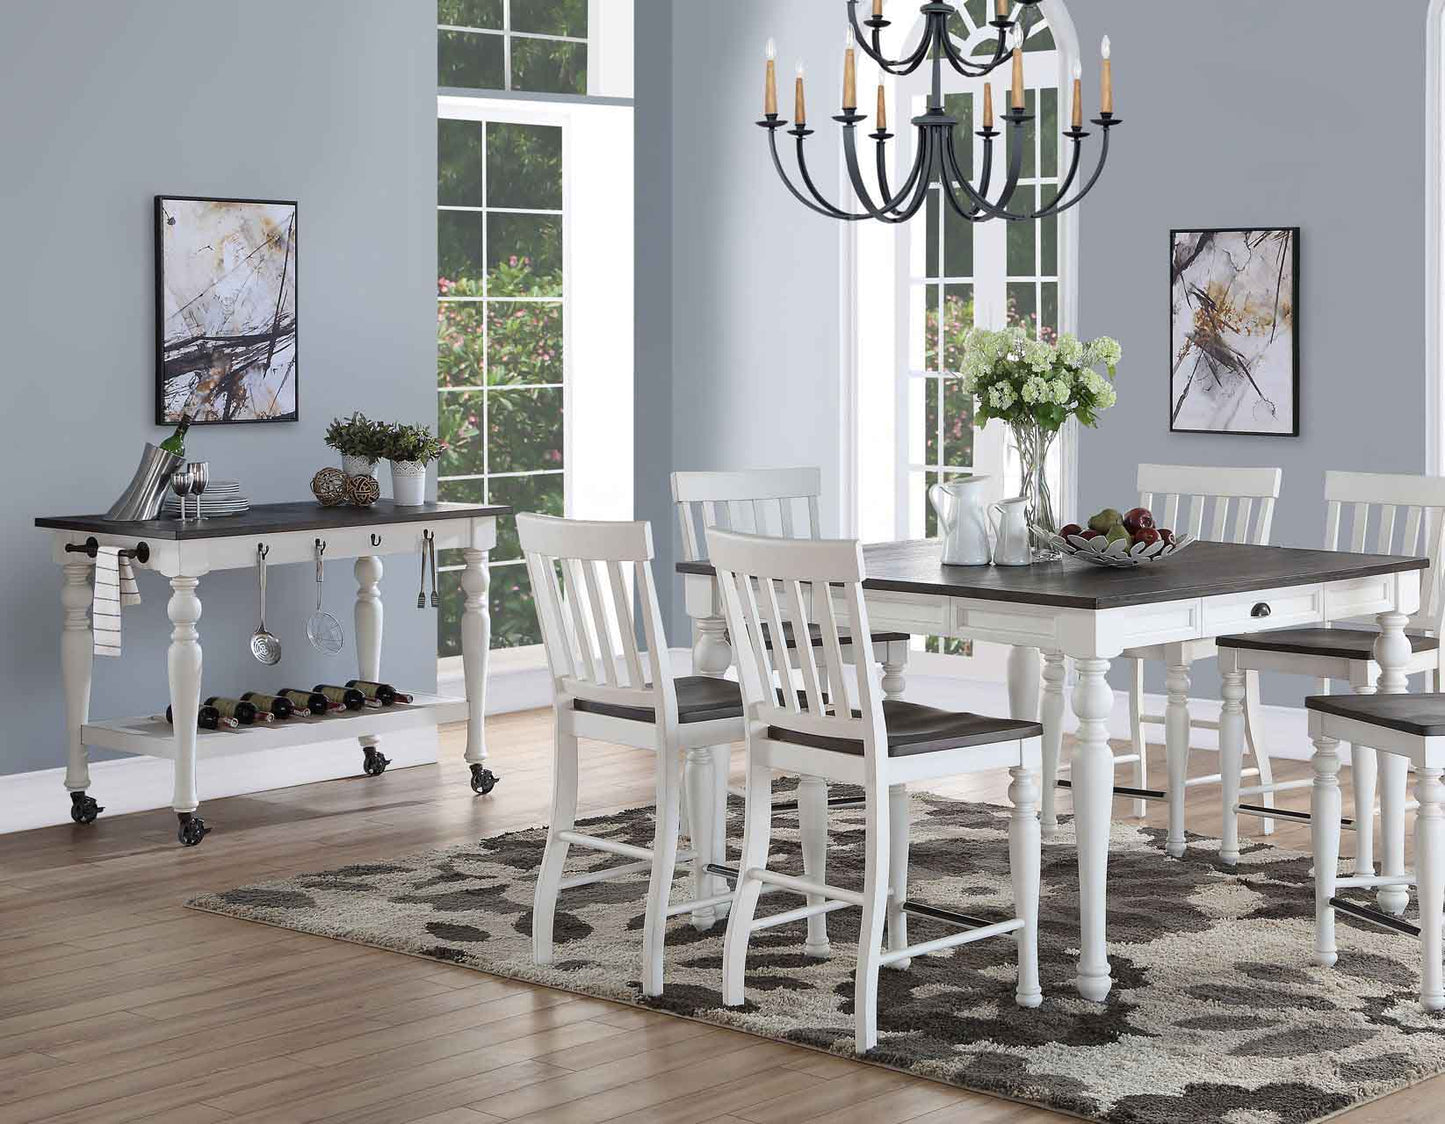 Joanna Two-Tone Counter Height Chairs (includes 2 chairs) by Steve Silver